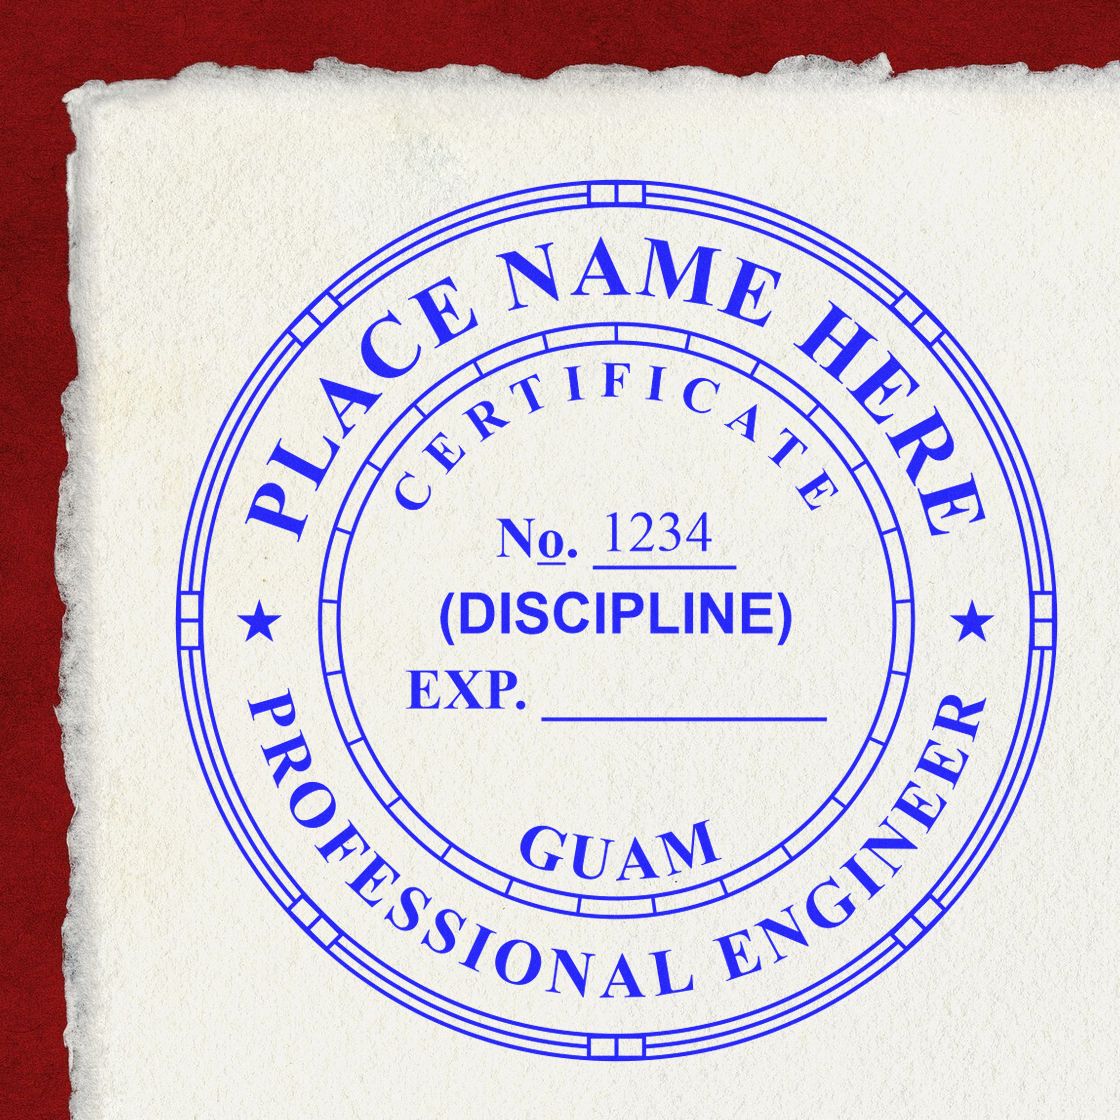 The Digital Guam PE Stamp and Electronic Seal for Guam Engineer stamp impression comes to life with a crisp, detailed photo on paper - showcasing true professional quality.